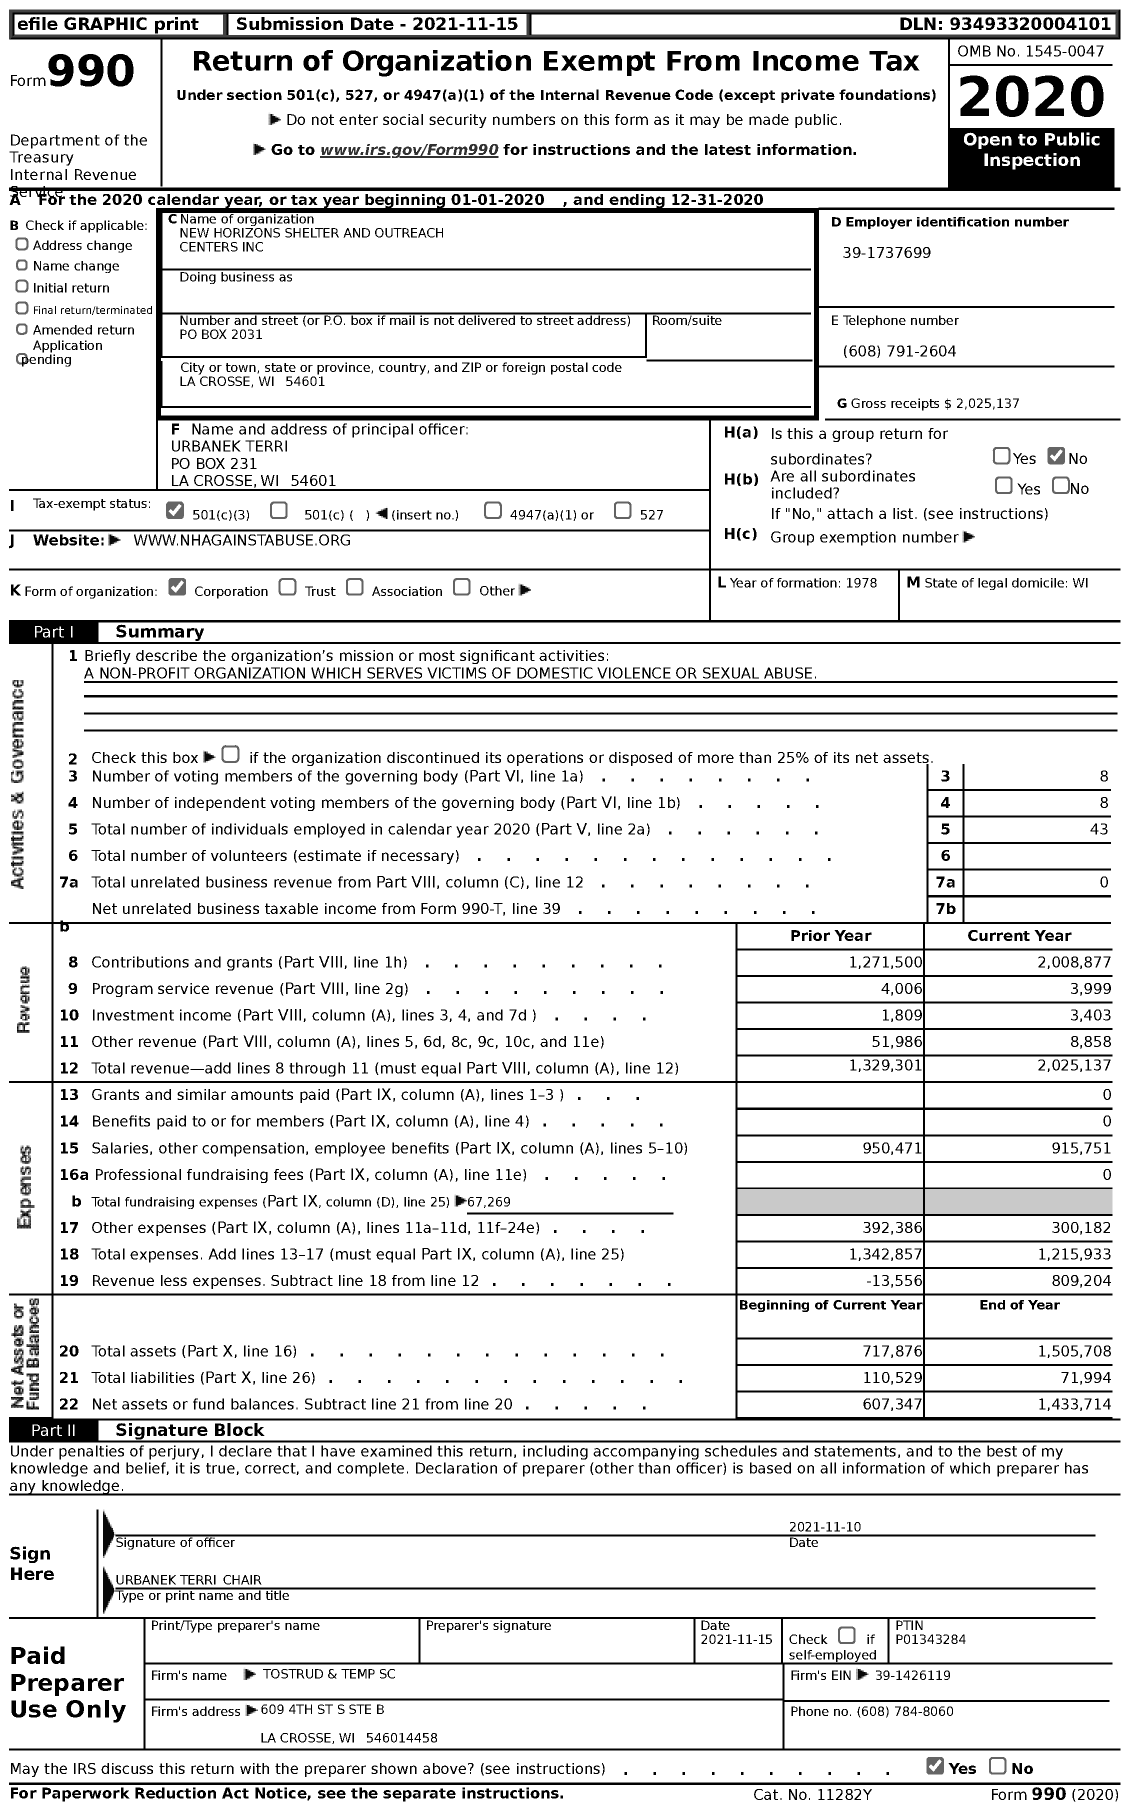 Image of first page of 2020 Form 990 for New Horizons Shelter and Outreach Centers